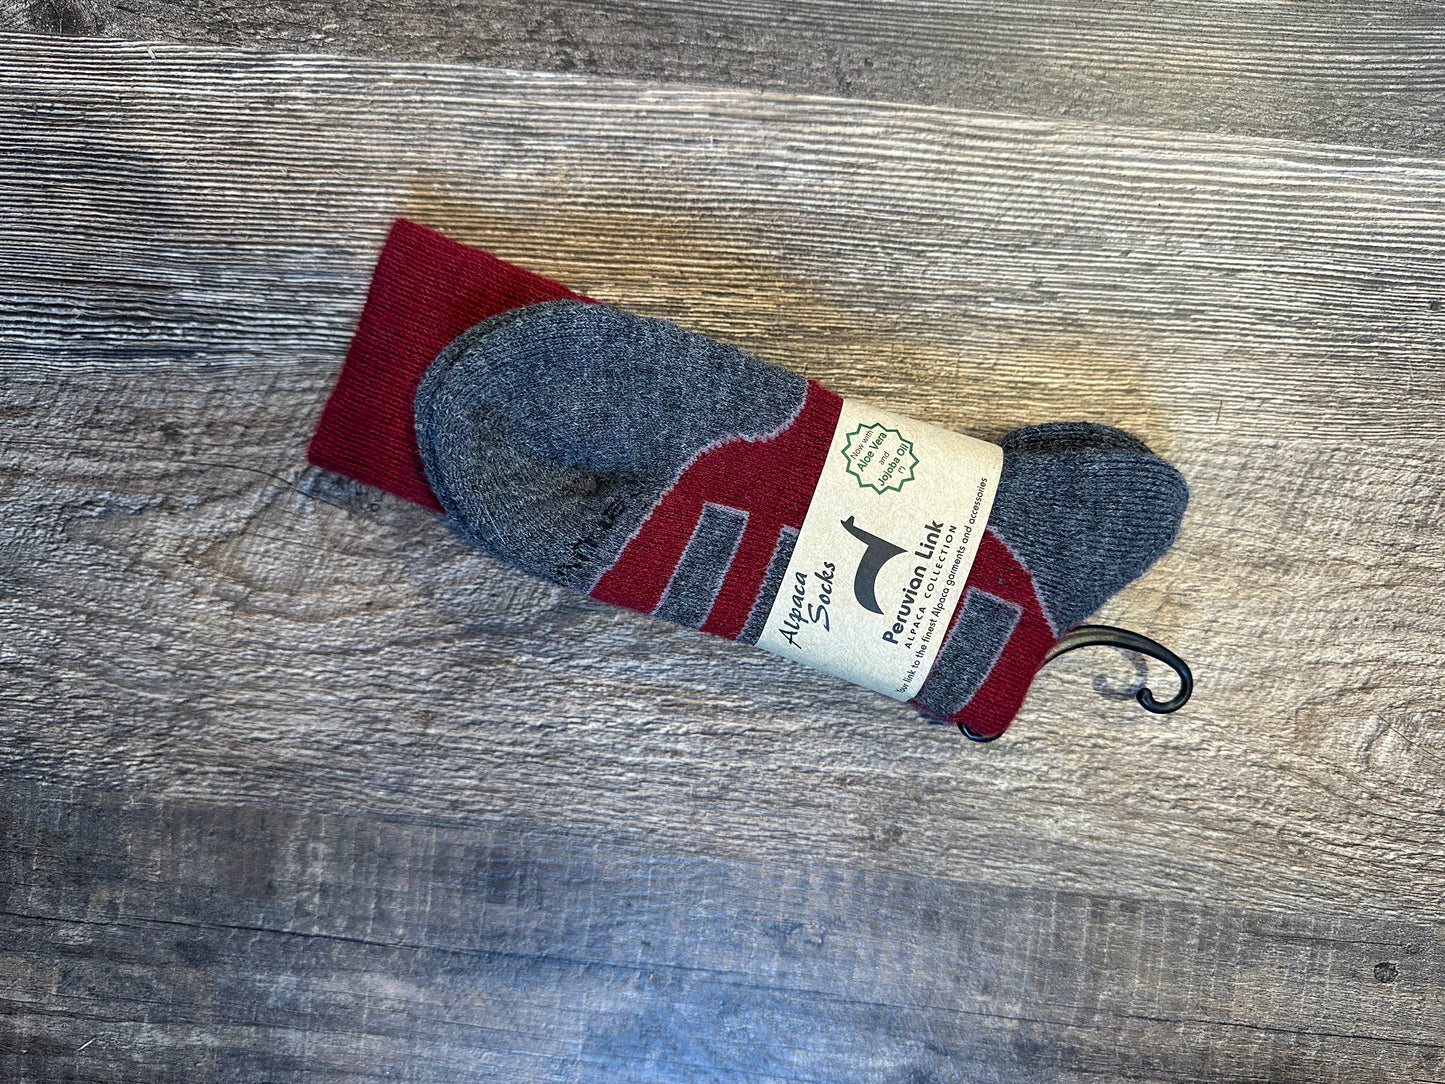 Fun Outdoor Socks-Great for skiing-higher shaft